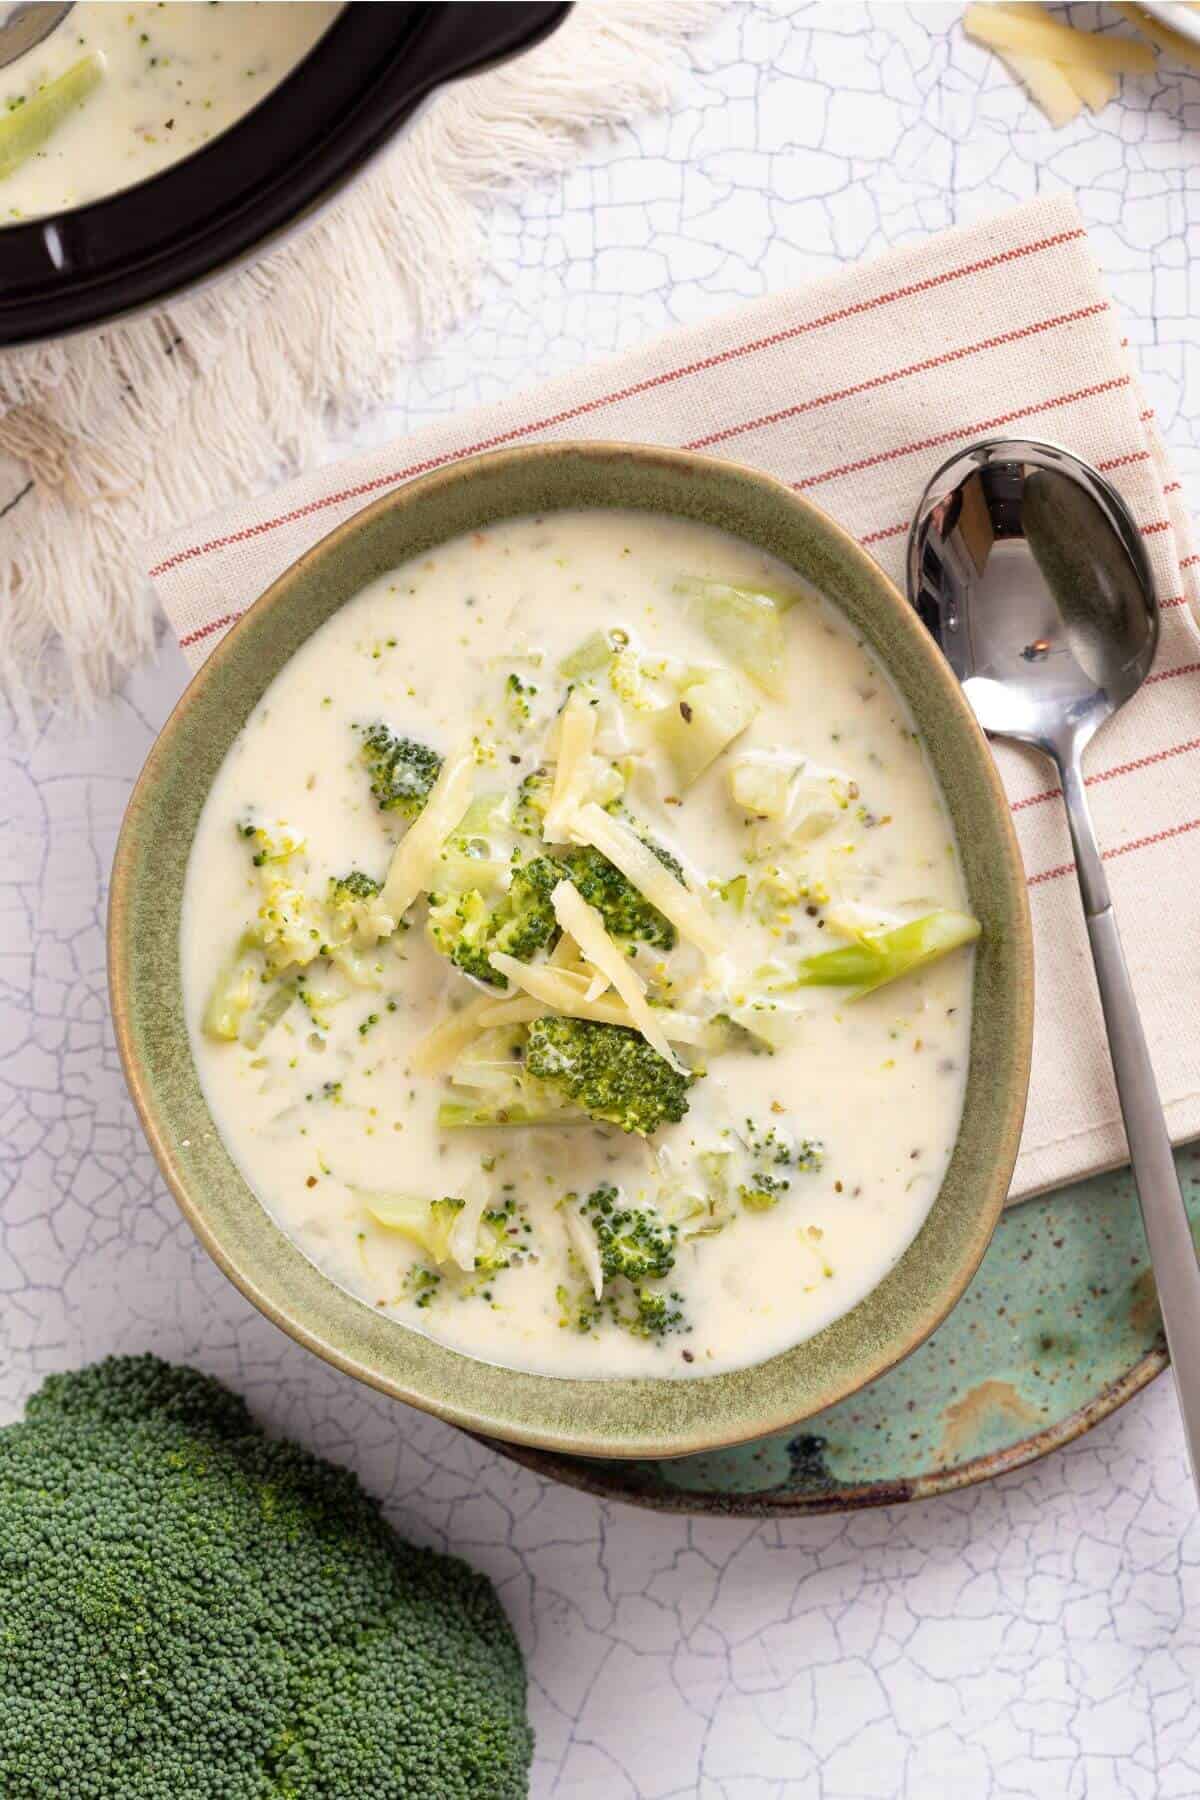 A bowl of broccoli soup with a spoon next to it.